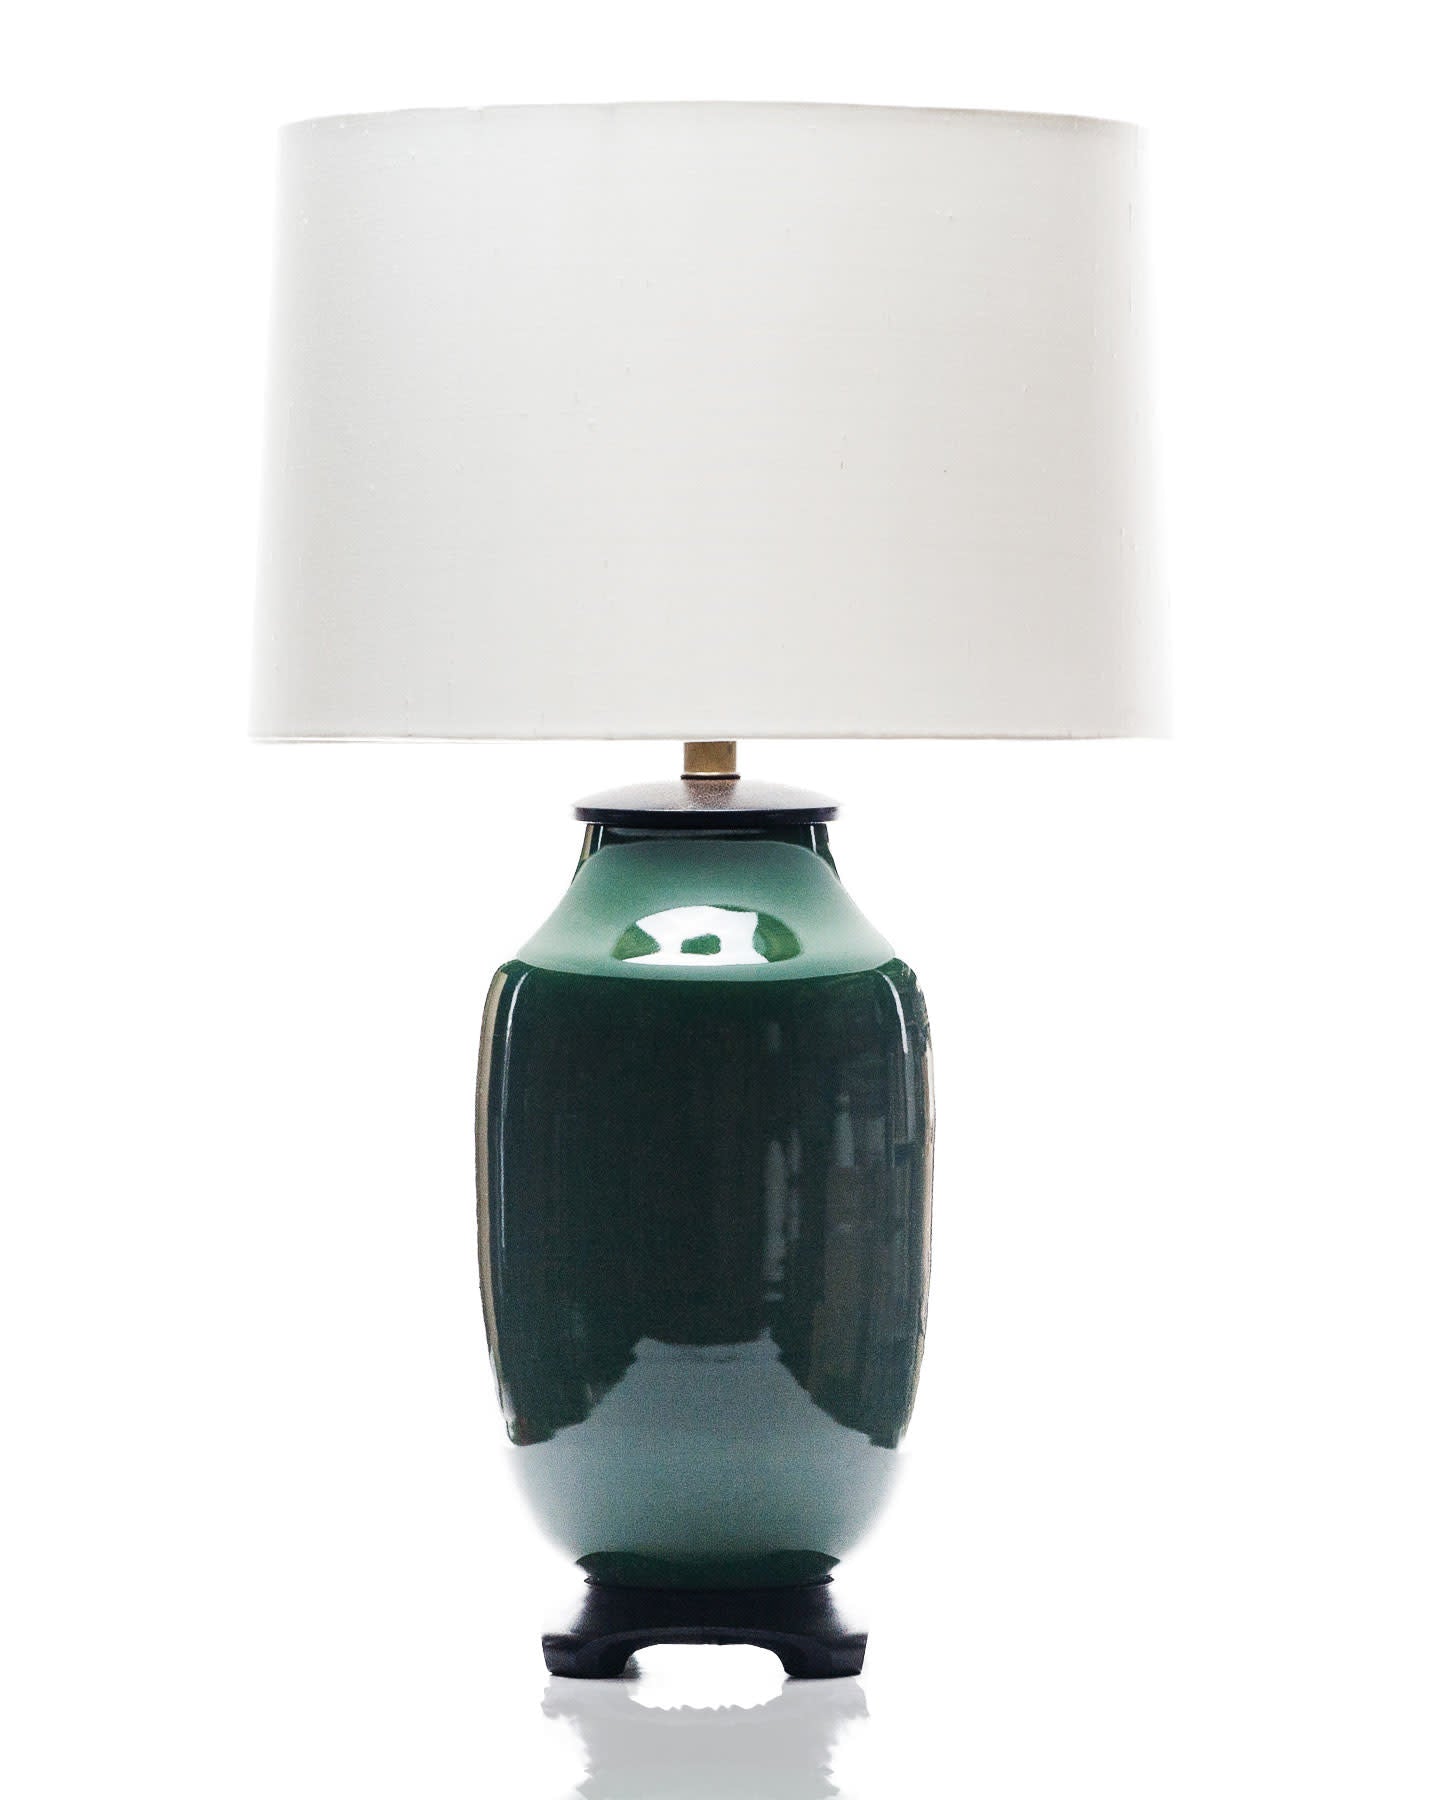 Legacy Lagom porcelain Lantern Lamp in Racing Green Crackle with Rosewood Base